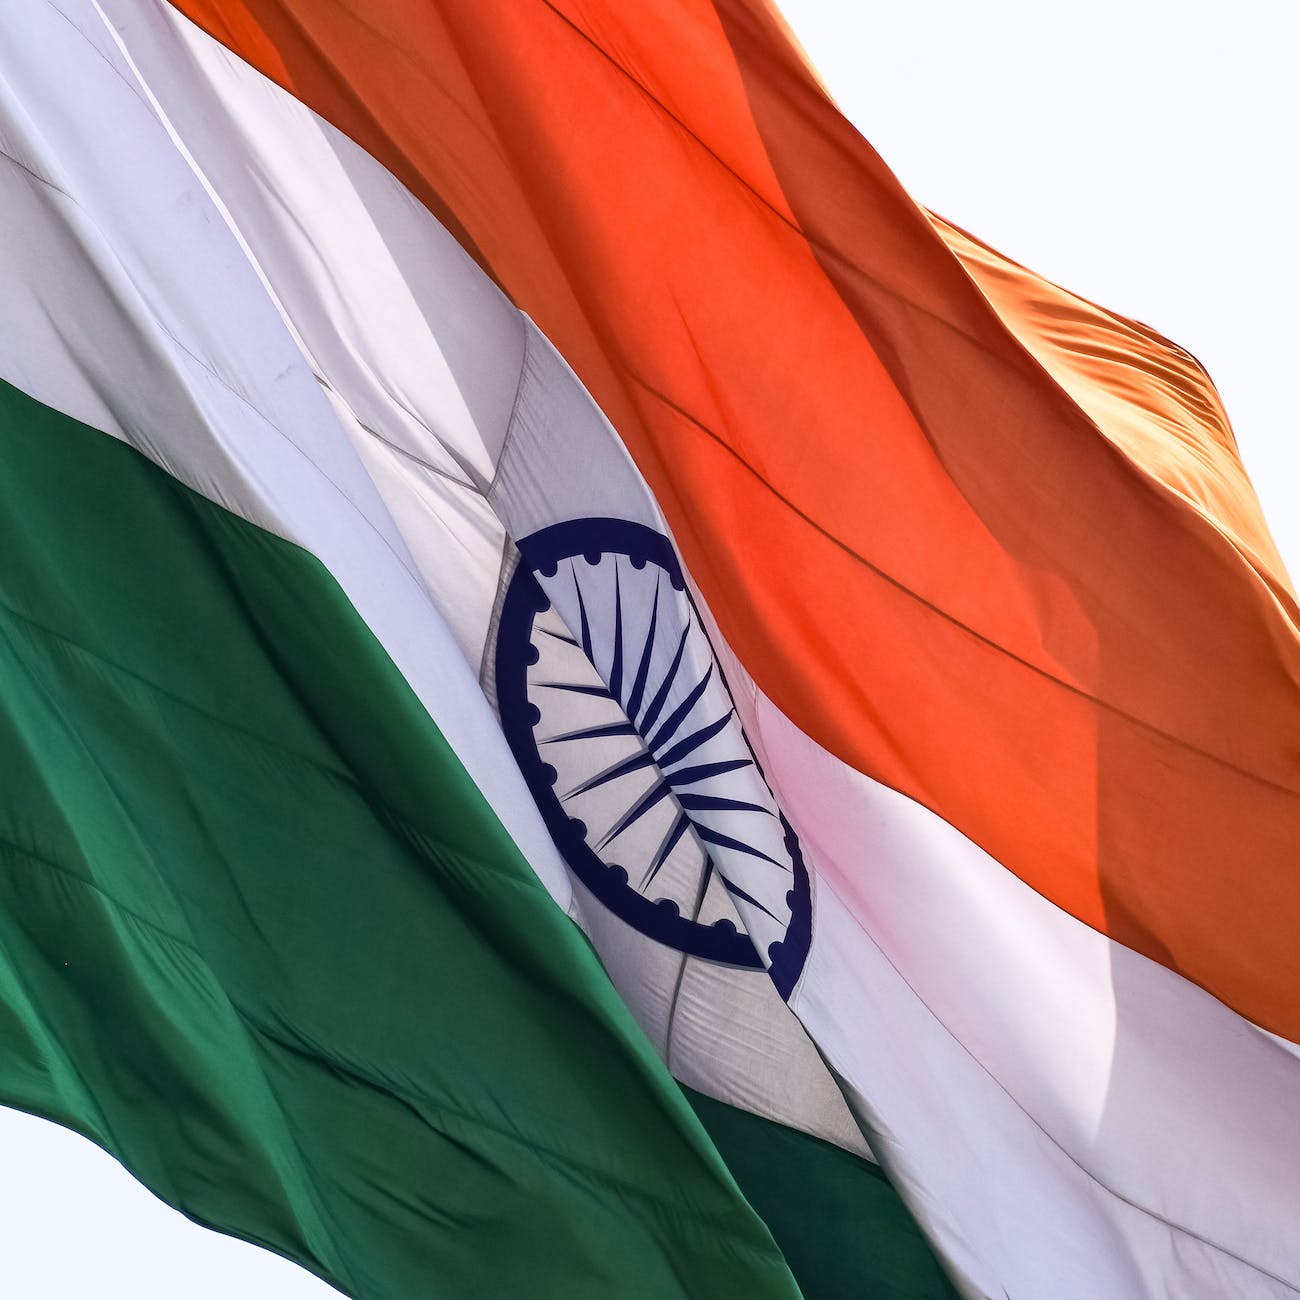 the Indian flag